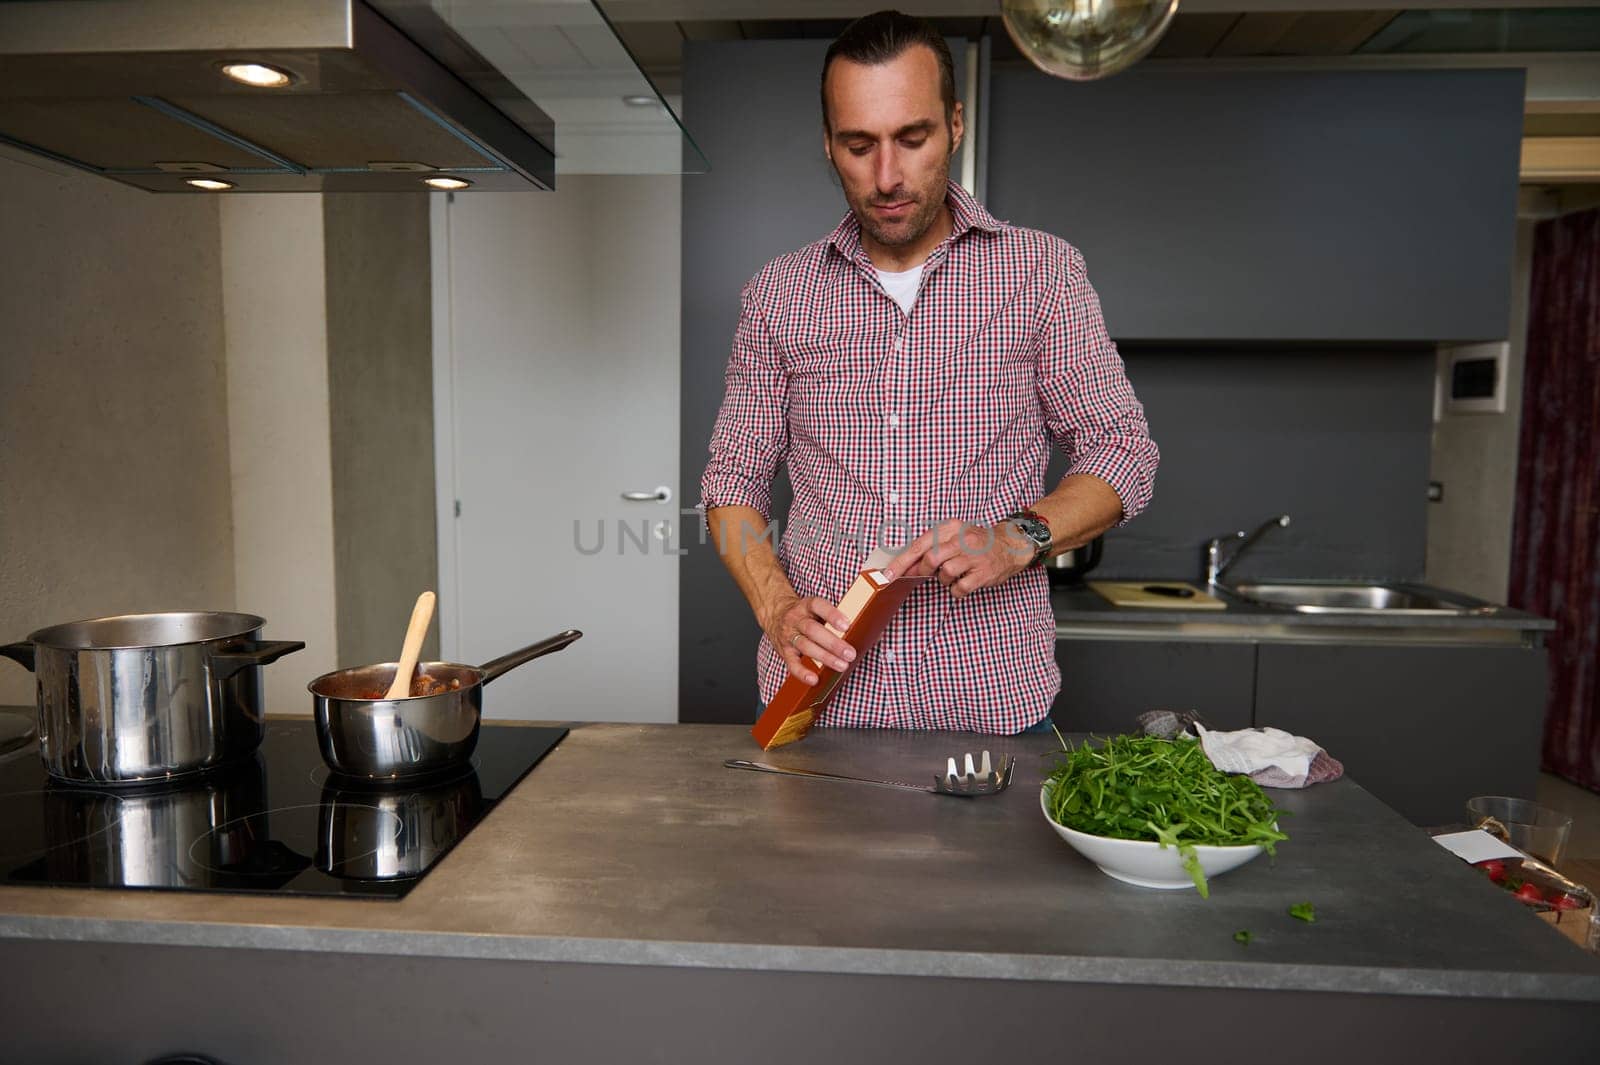 Young man chef opening a cardboard pack with integral Italian pasta, standing at kitchen counter in modern minimalist home kitchen interior. People. Lifestyle. Italian food and cuisine